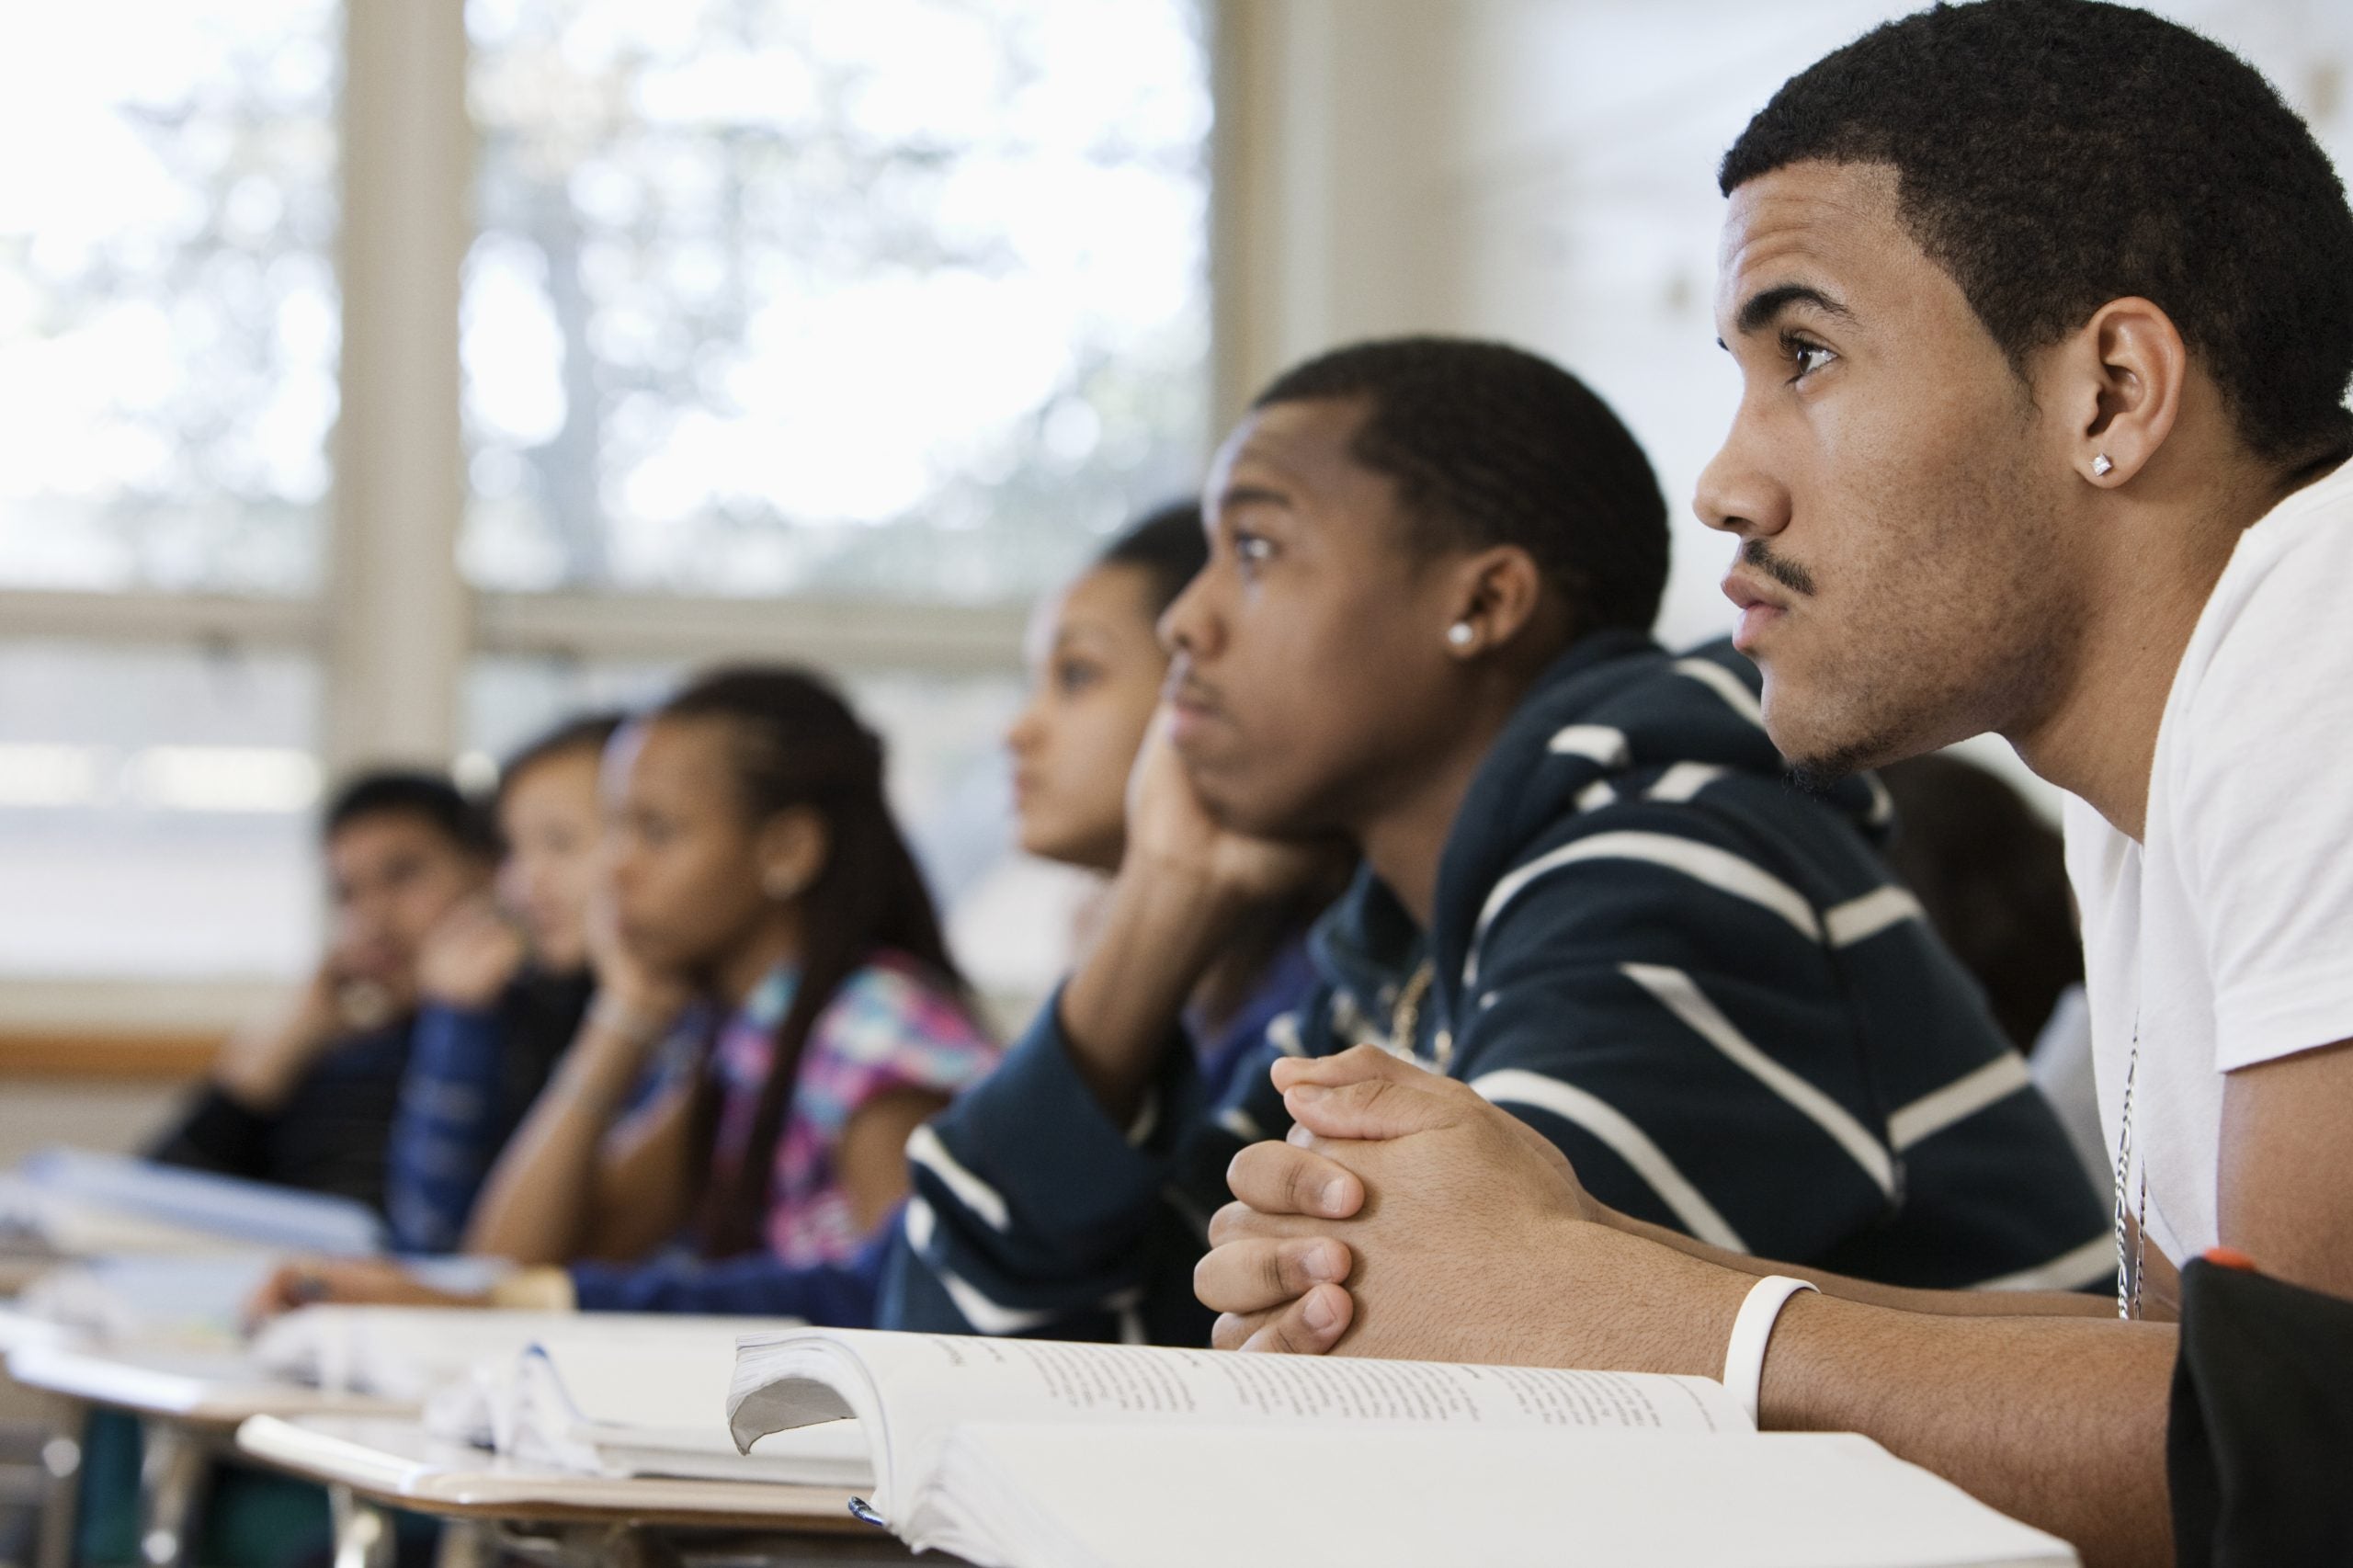 Here's How An African-American Culture Class Aims To Keep Black Youth In School